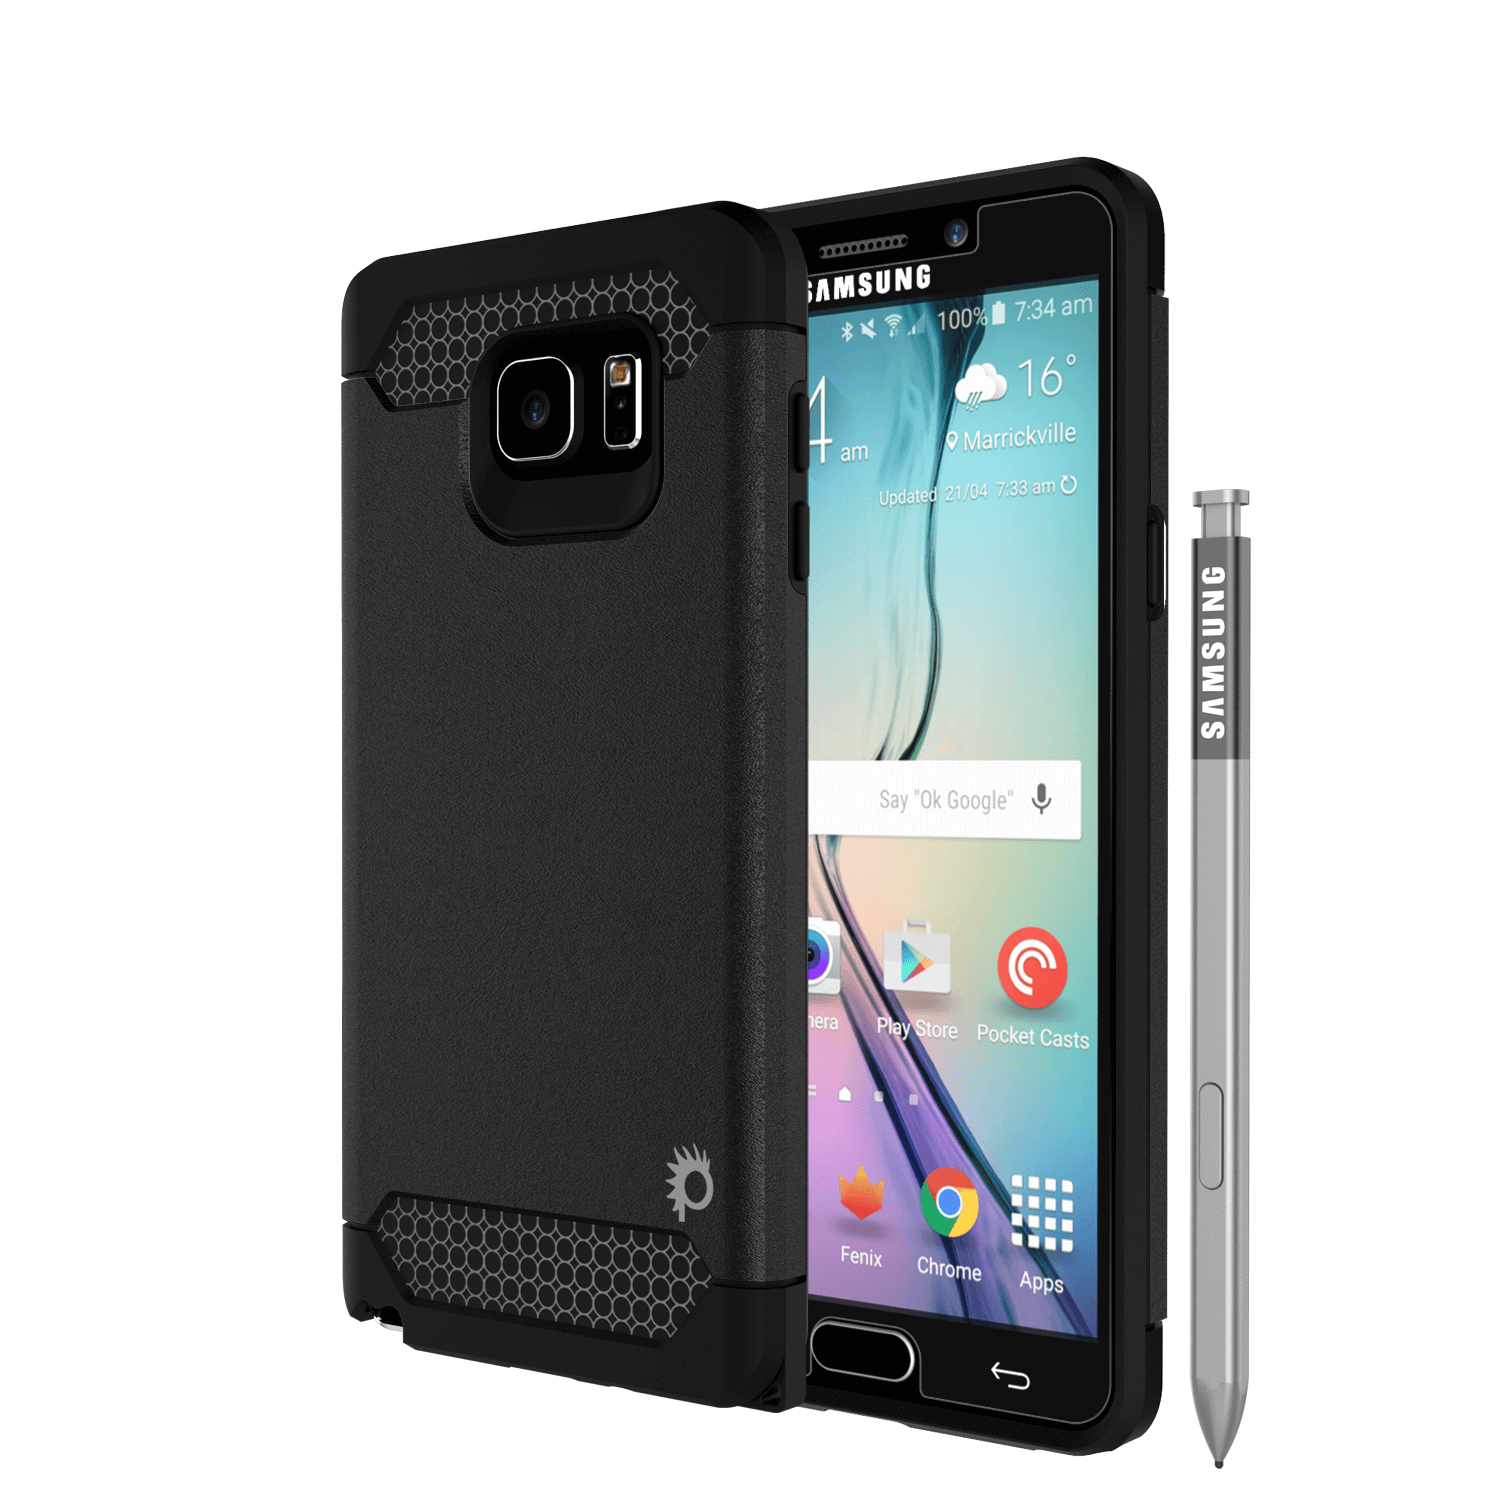 Galaxy Note 5 Case PunkCase Galactic Black Series Slim Armor Soft Cover Case w/ Tempered Glass